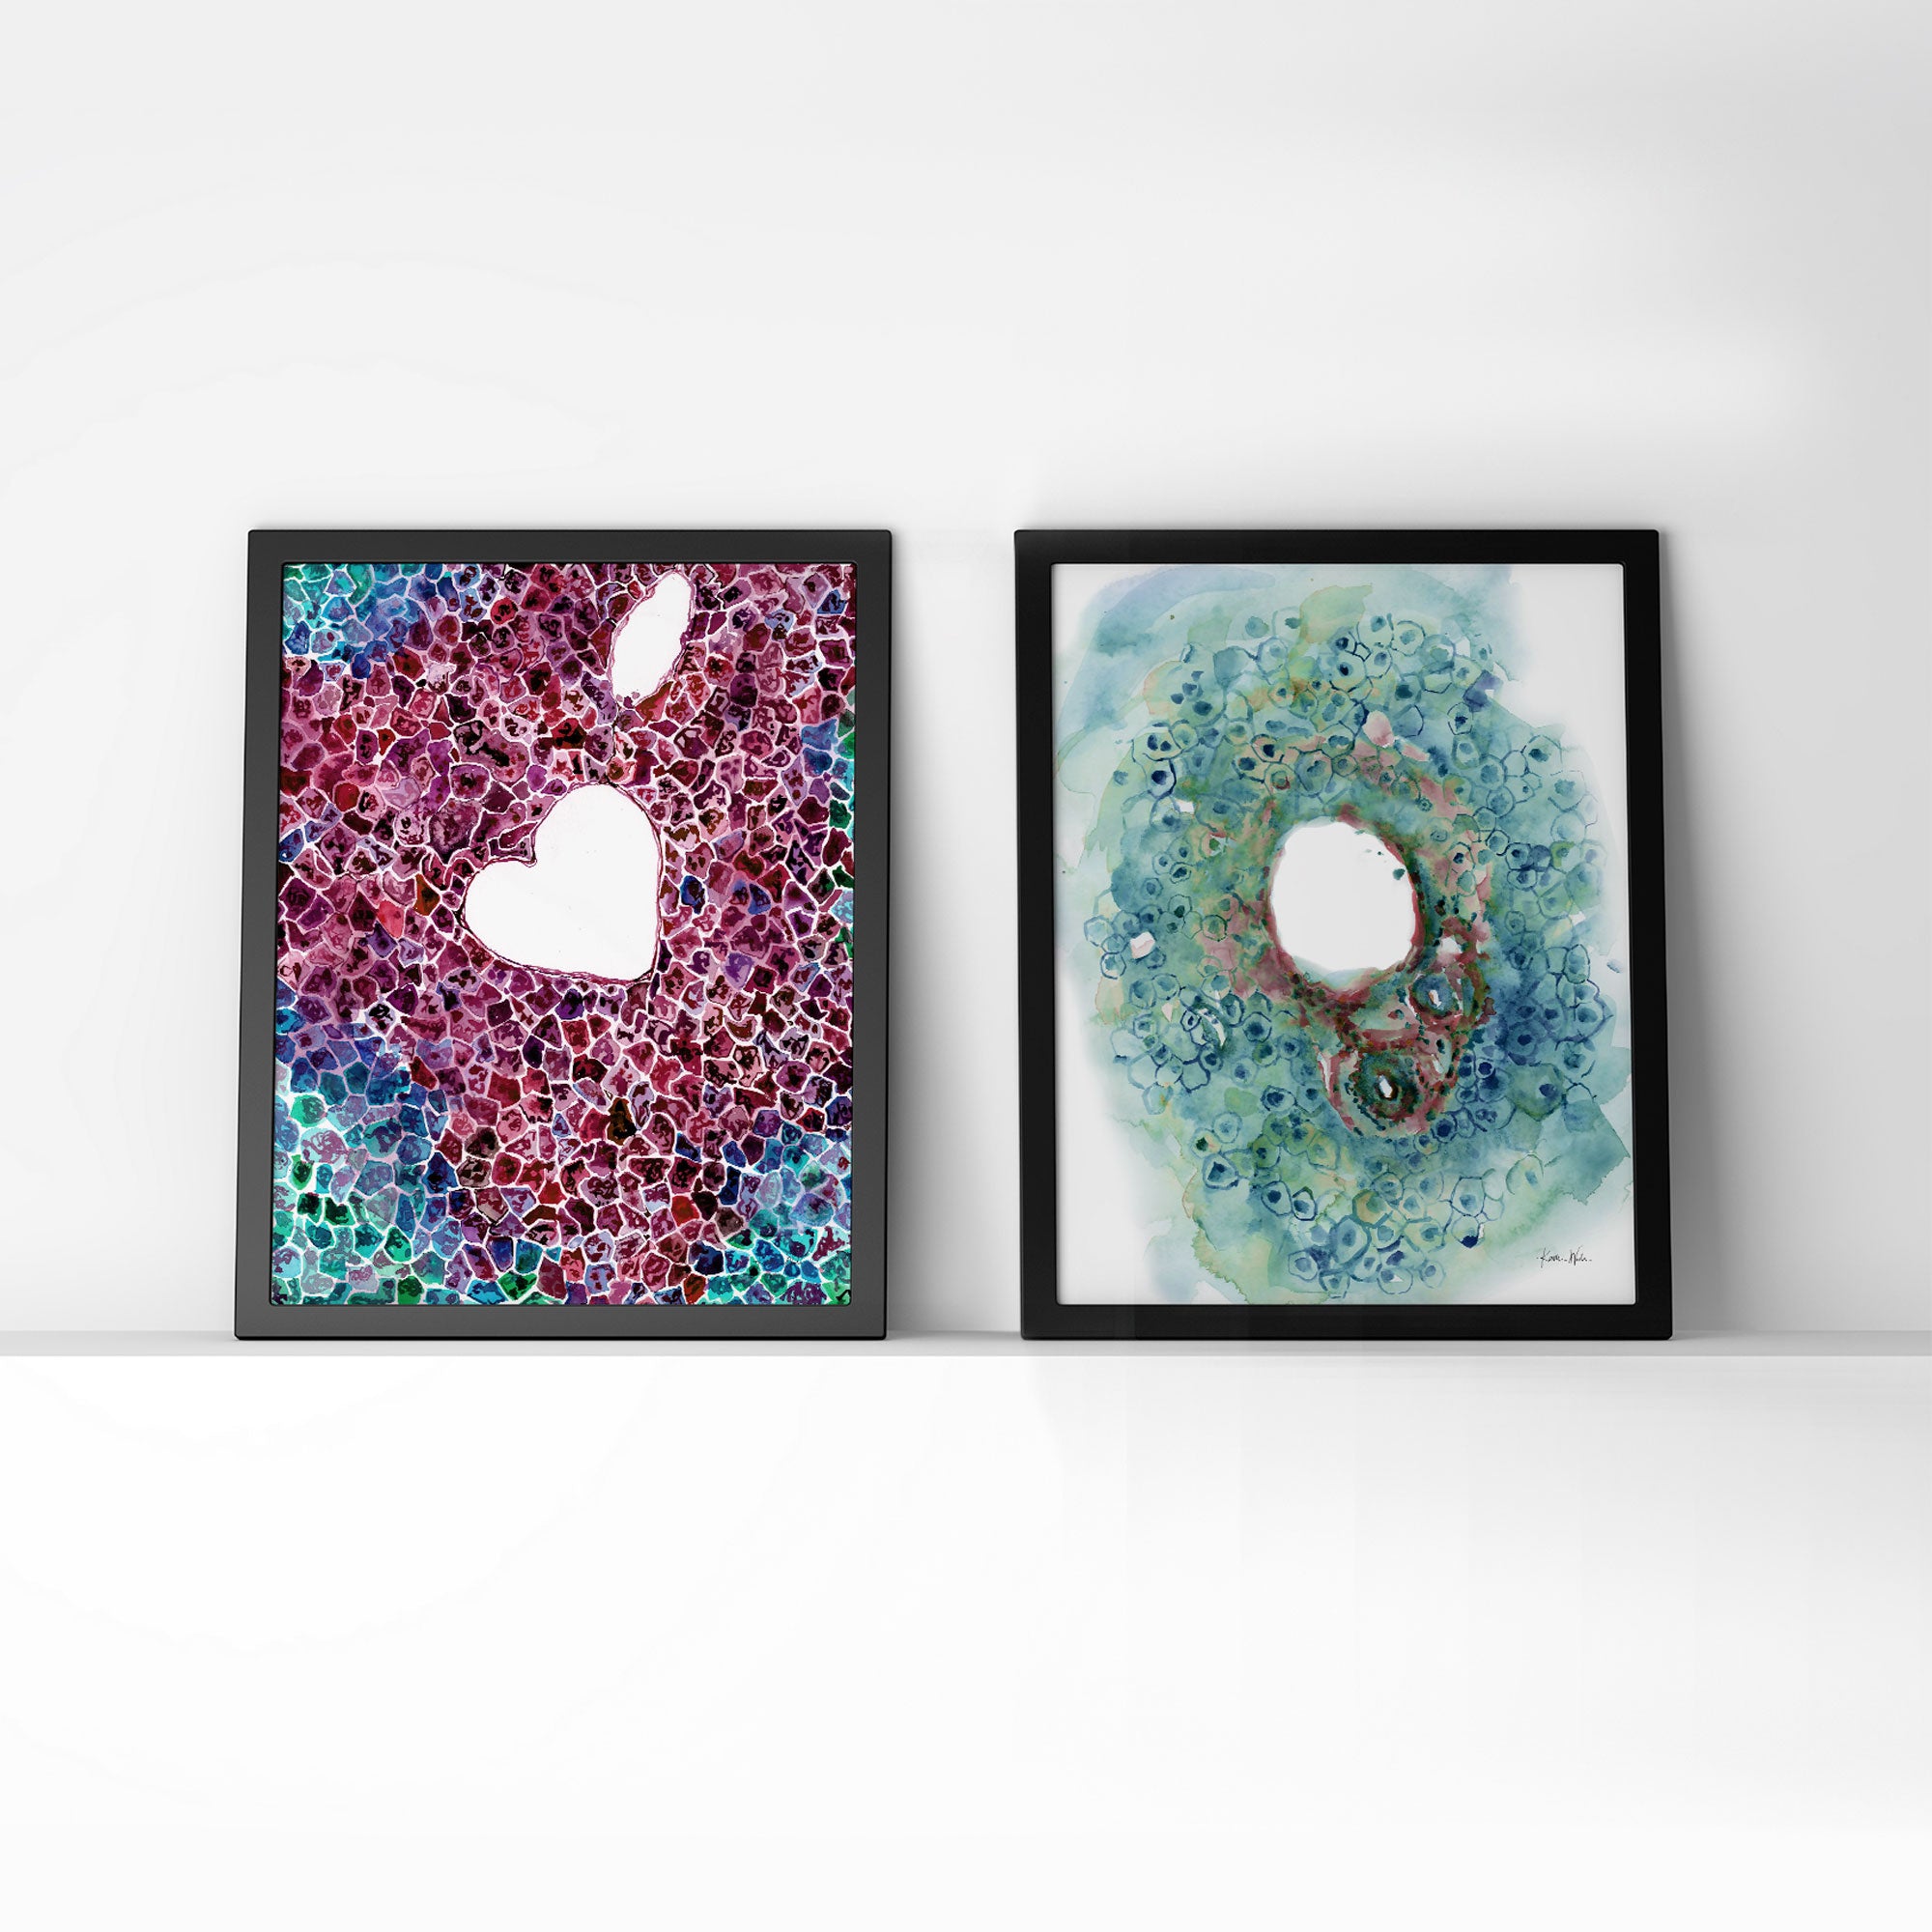 Framed watercolor painting set of the bile and hepatic ducts.